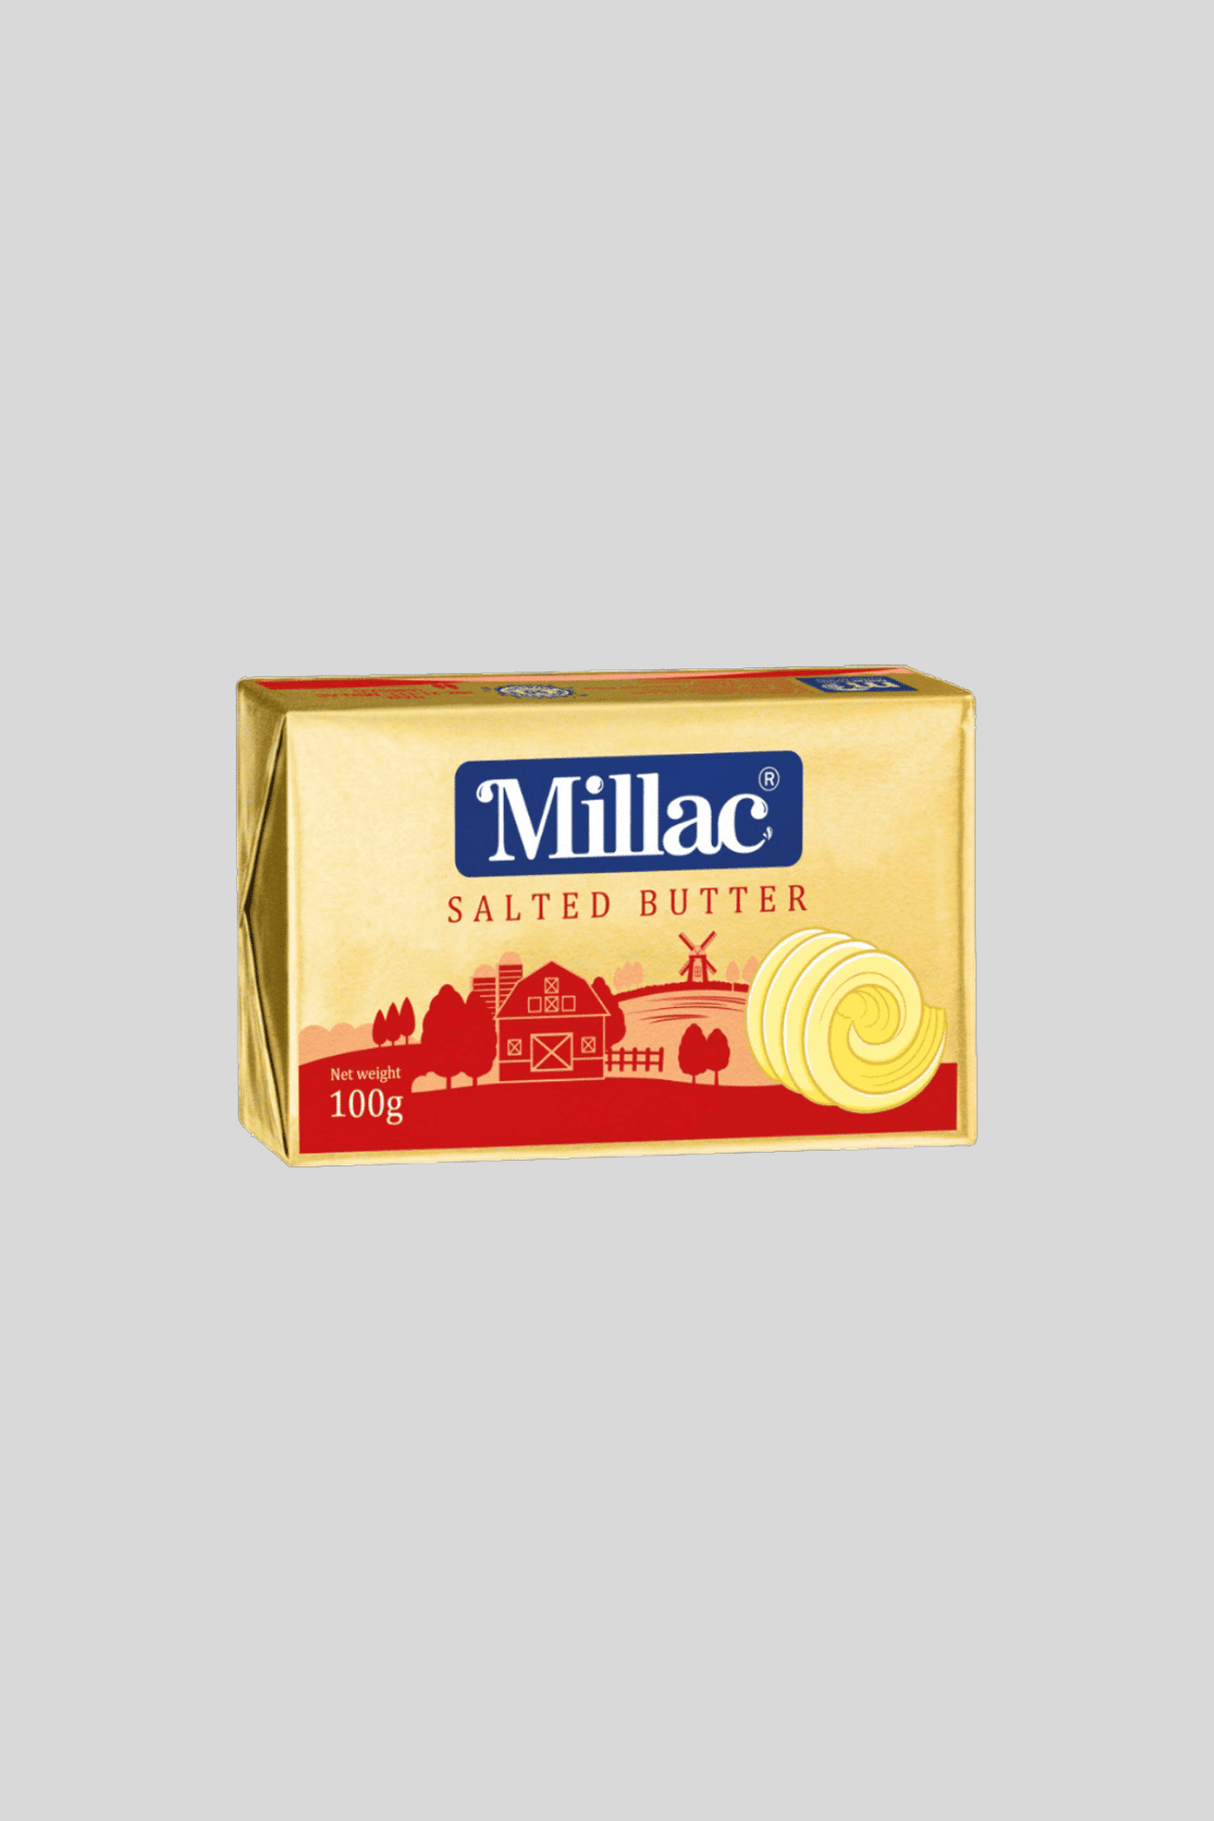 millac butter salted 100g